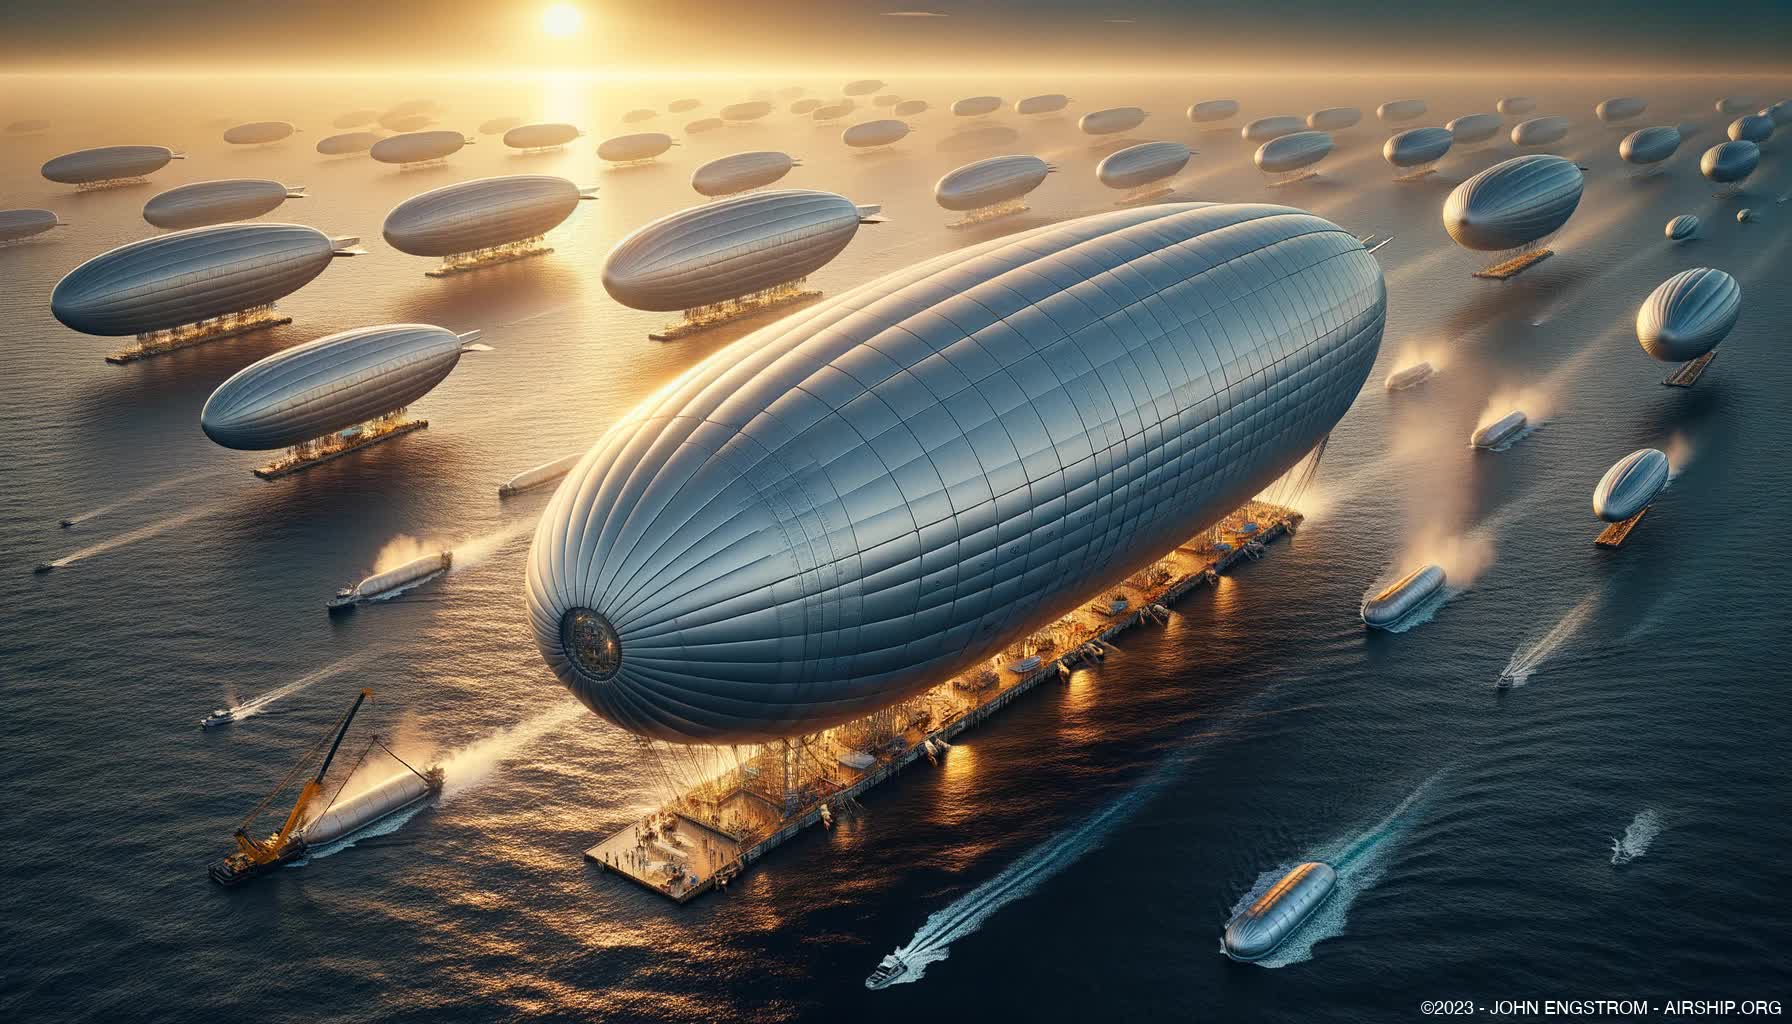 Airship Related Art -  Concept Art and Systems Visualization